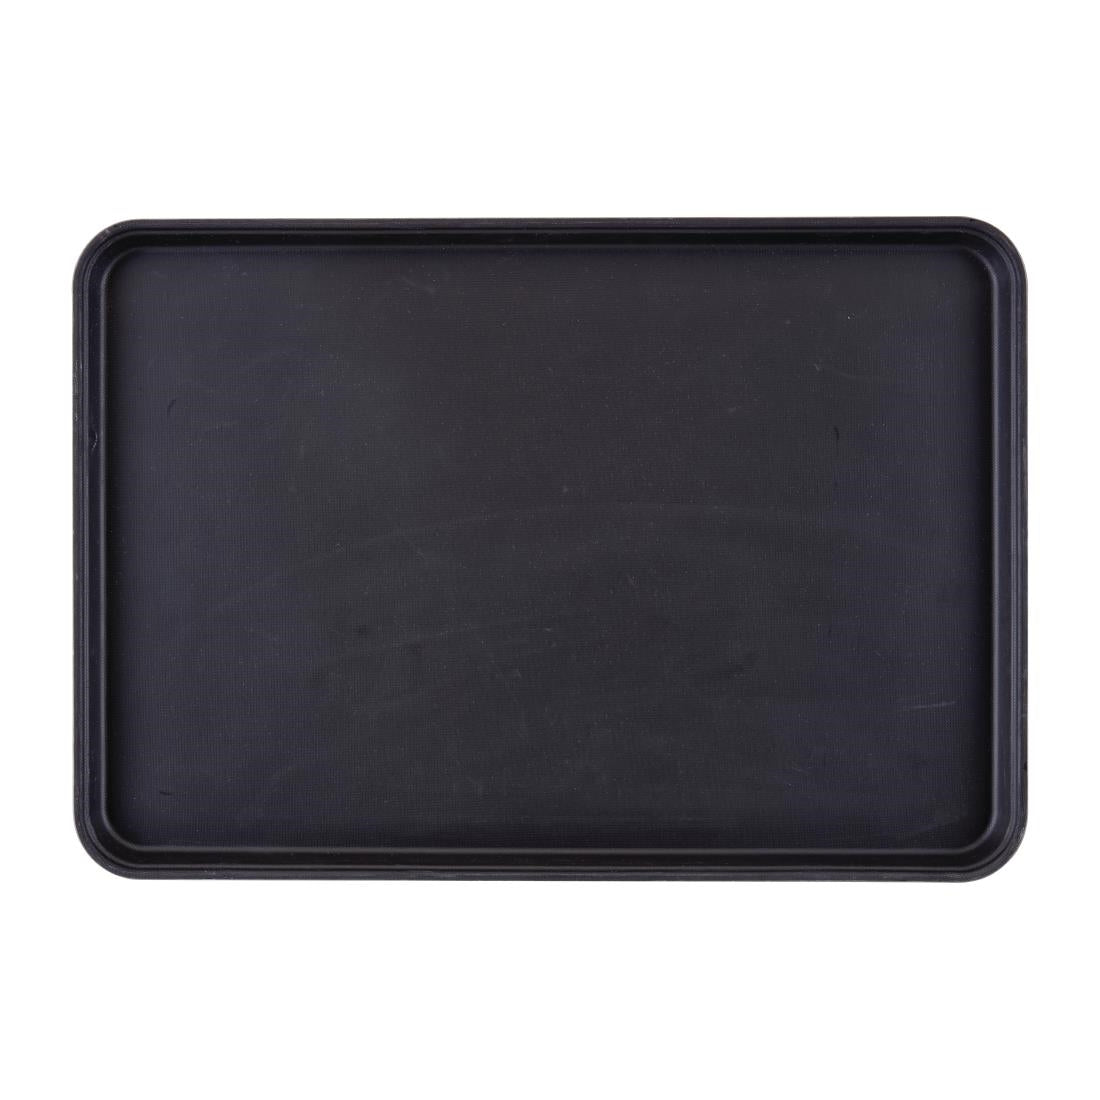 CL930 Cambro Tray Camtread Black - 457mm x 660mm 5 year guarantee JD Catering Equipment Solutions Ltd